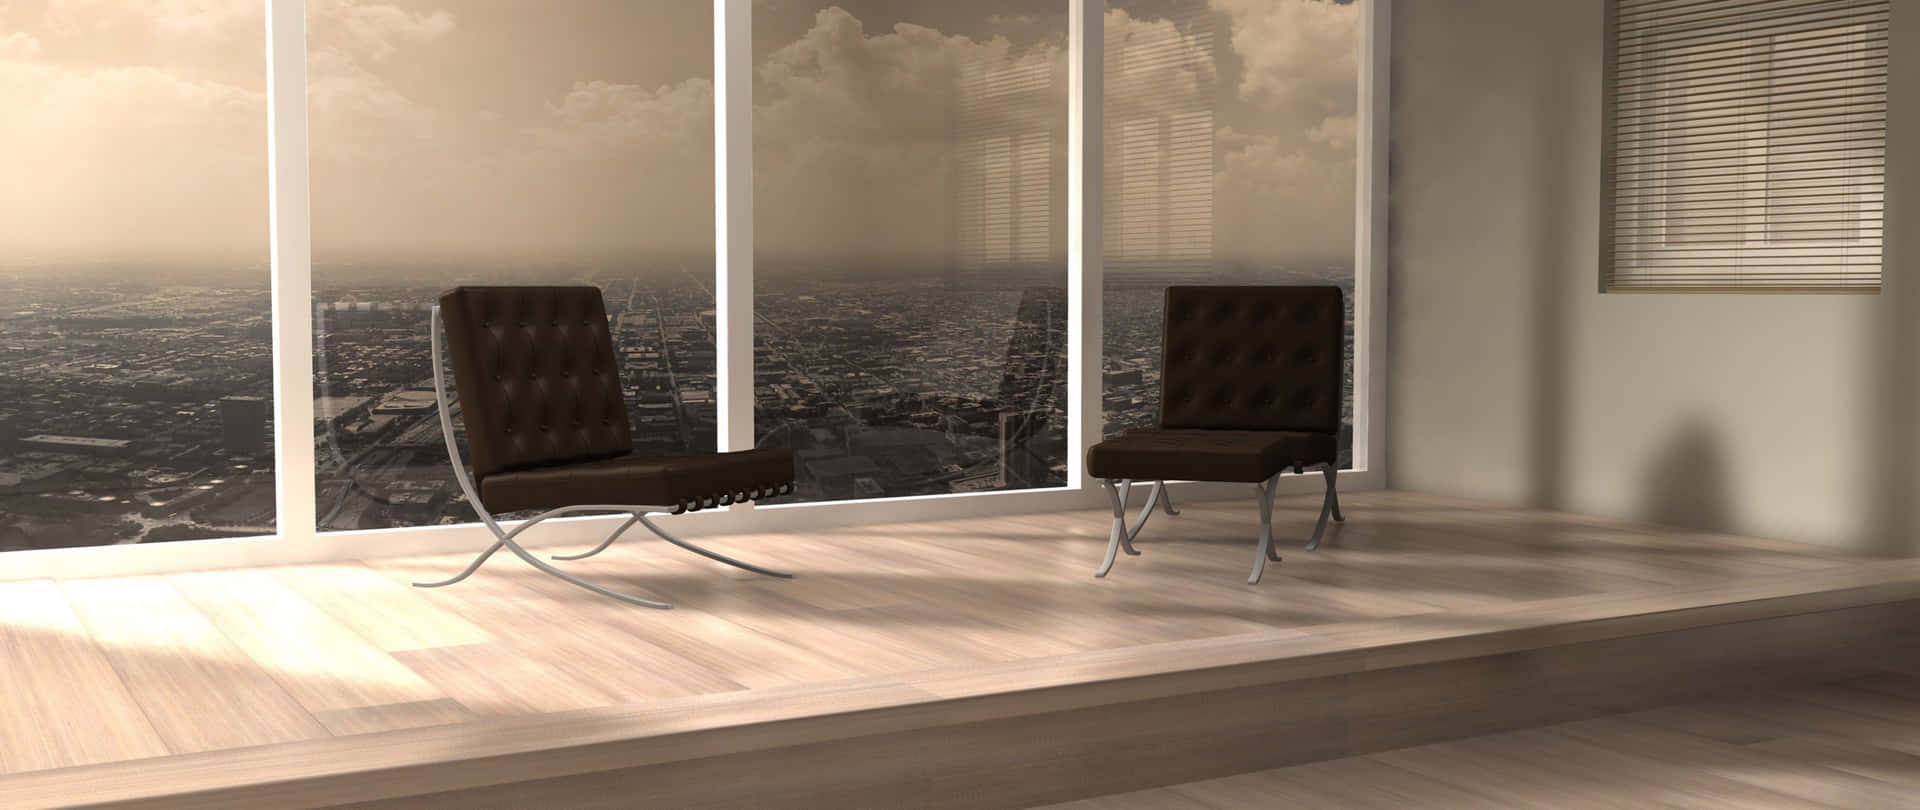 Two Lounging Chairs 1440p Office Background